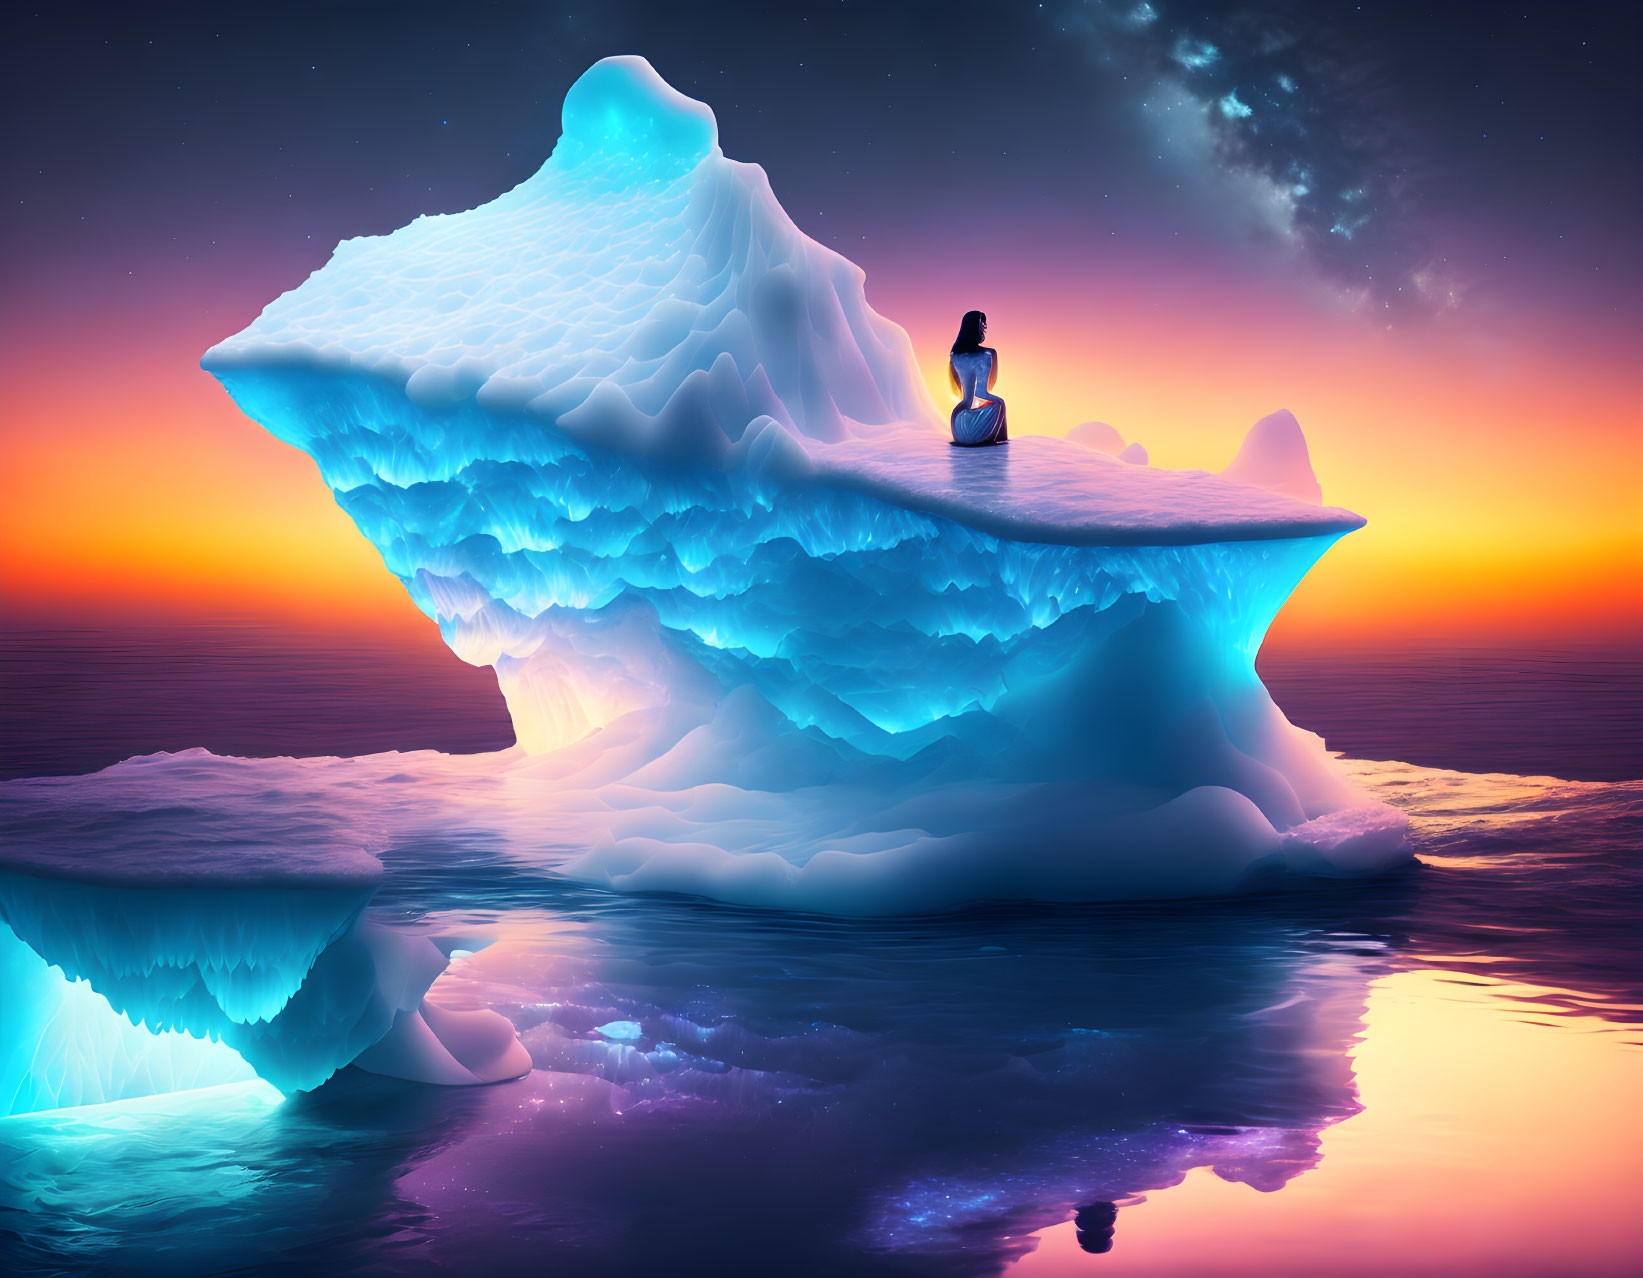 Person sitting on iceberg under sunset sky with stars above